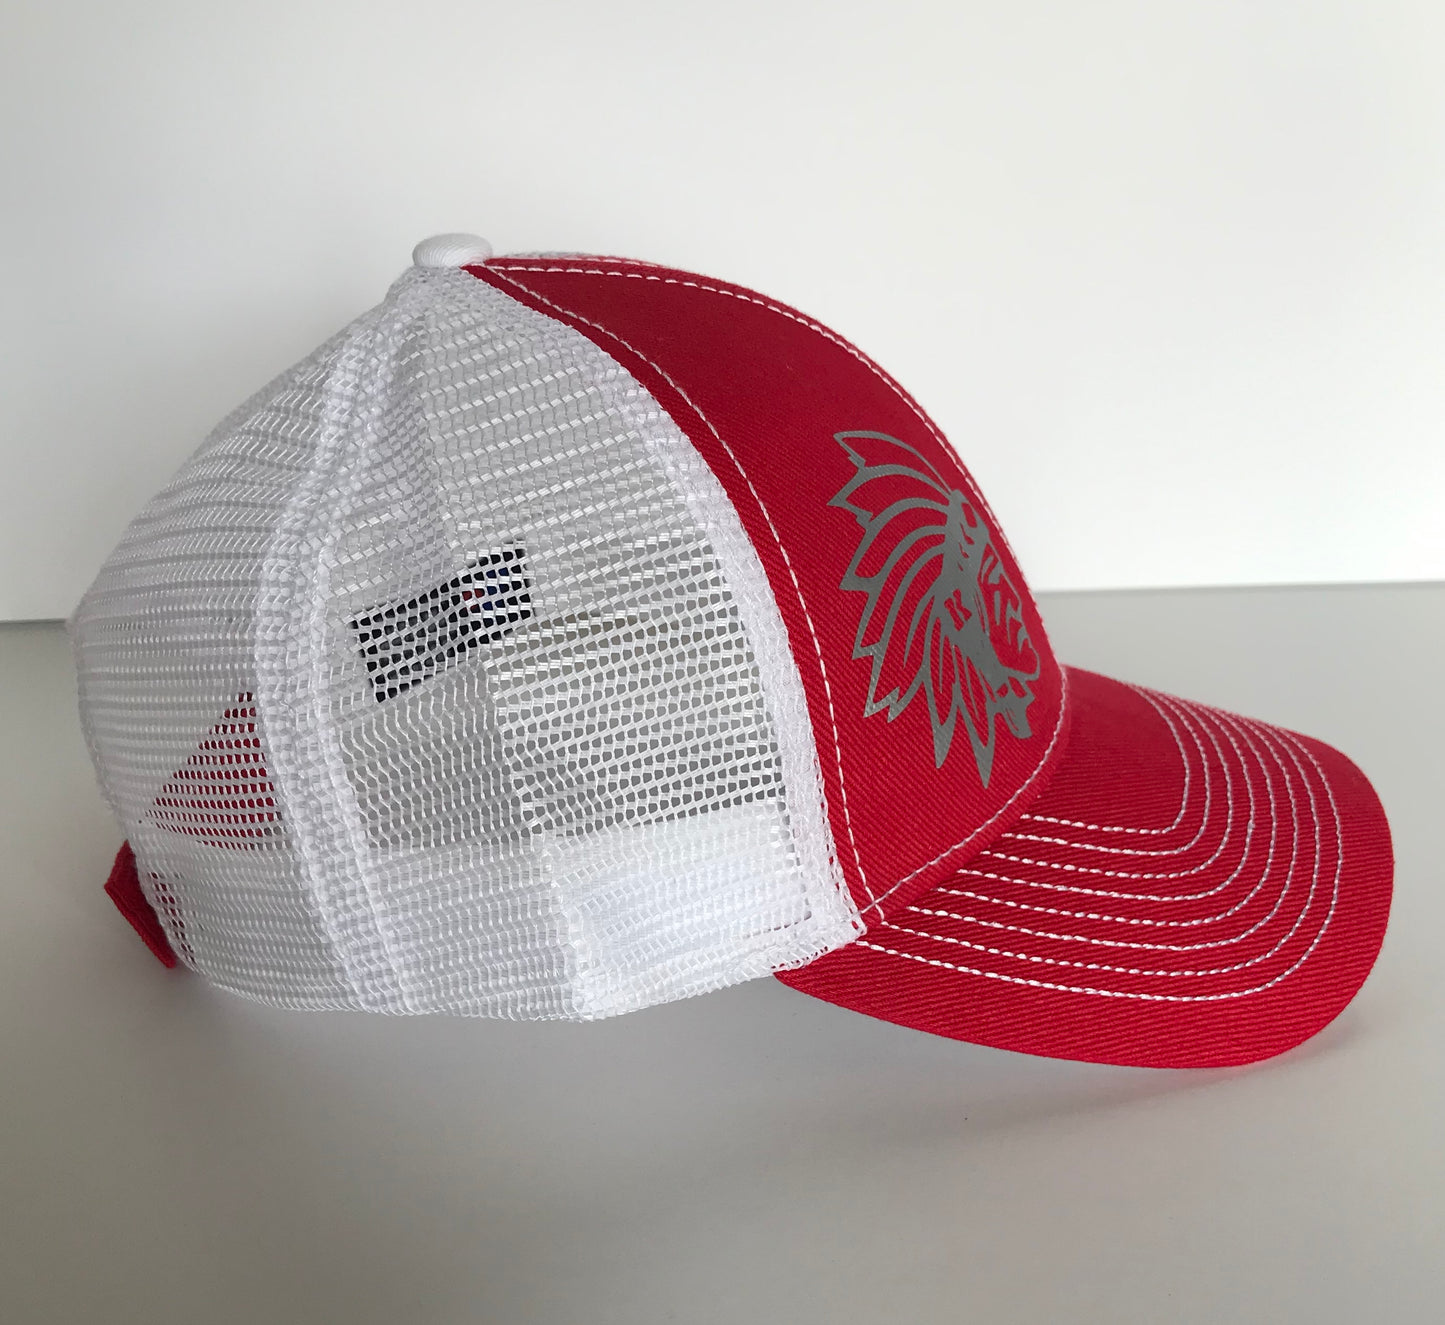 Low Profile Knox Redskins Hat - Adjustable - Red/White/Silver - Alternate Color Stitching